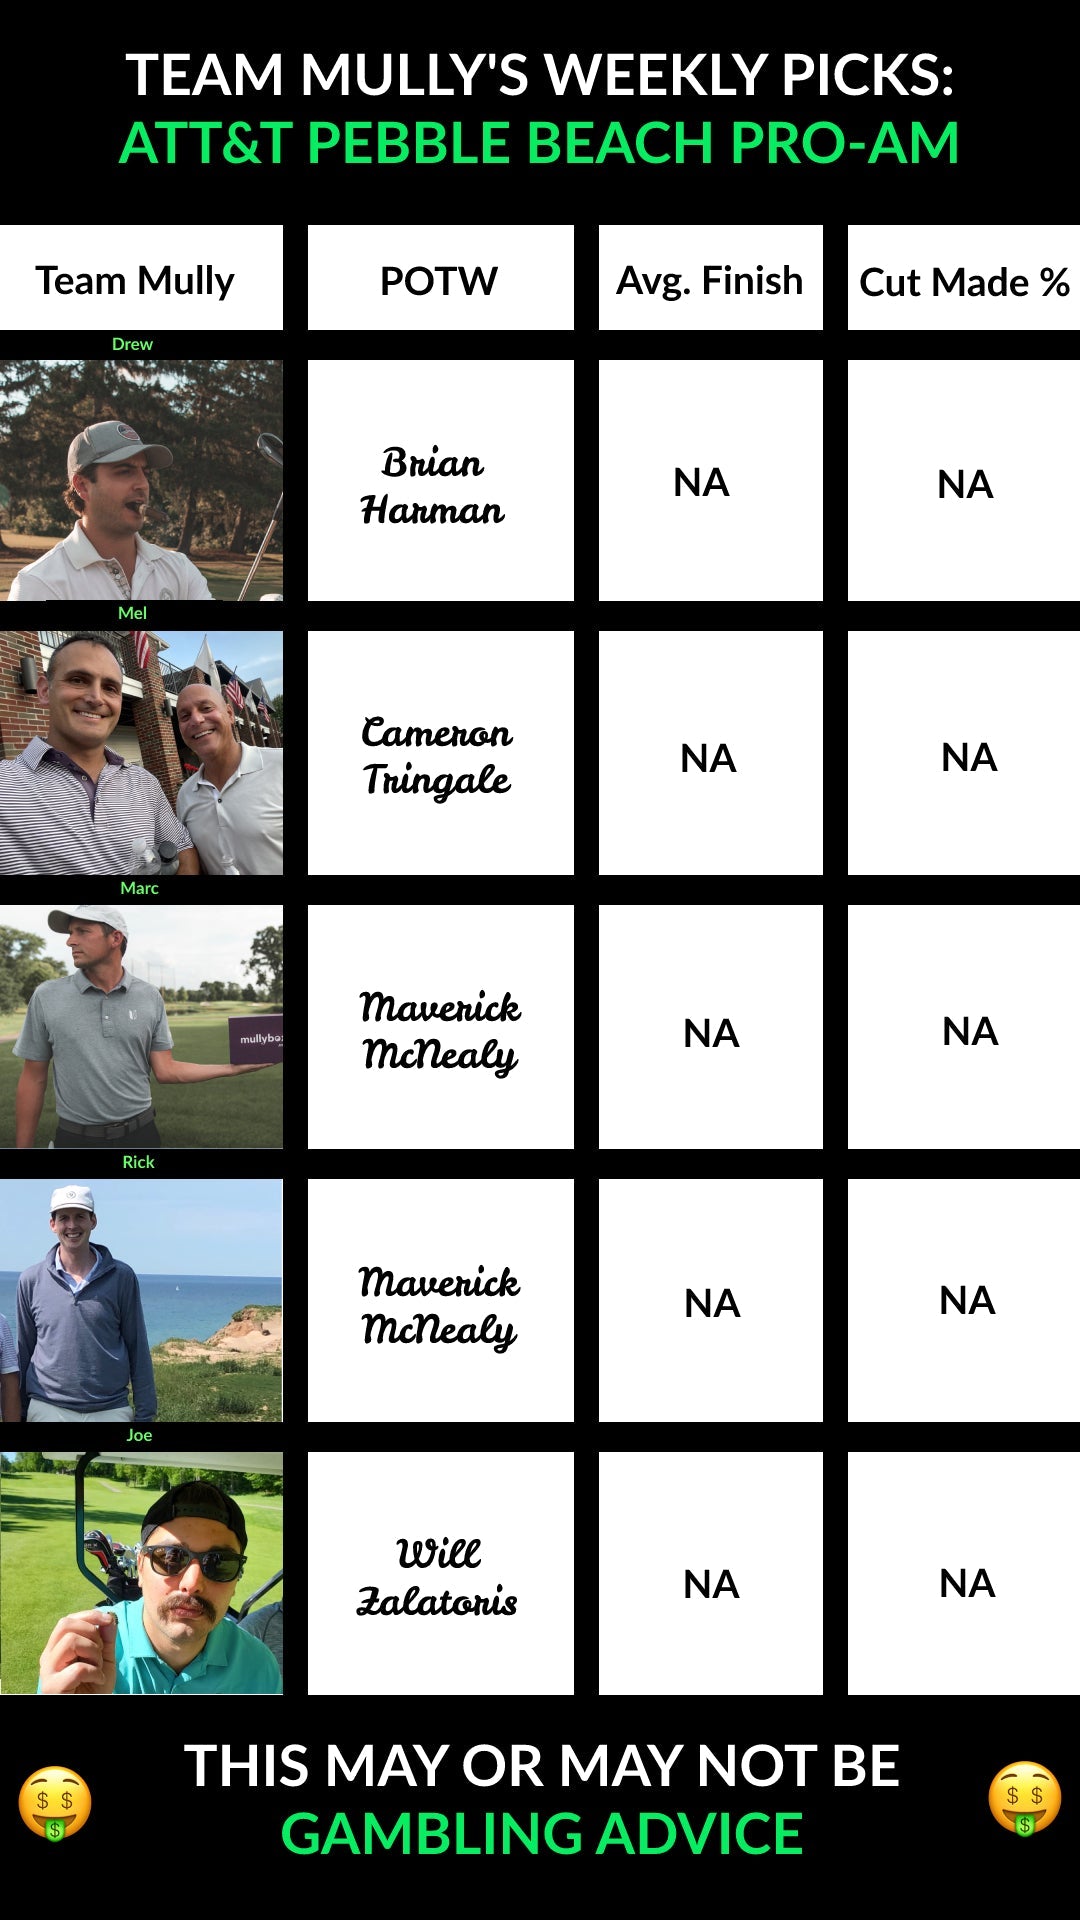 AT&T Pebble Beach Best Picks, predictions from the Mully Team - Mullybox